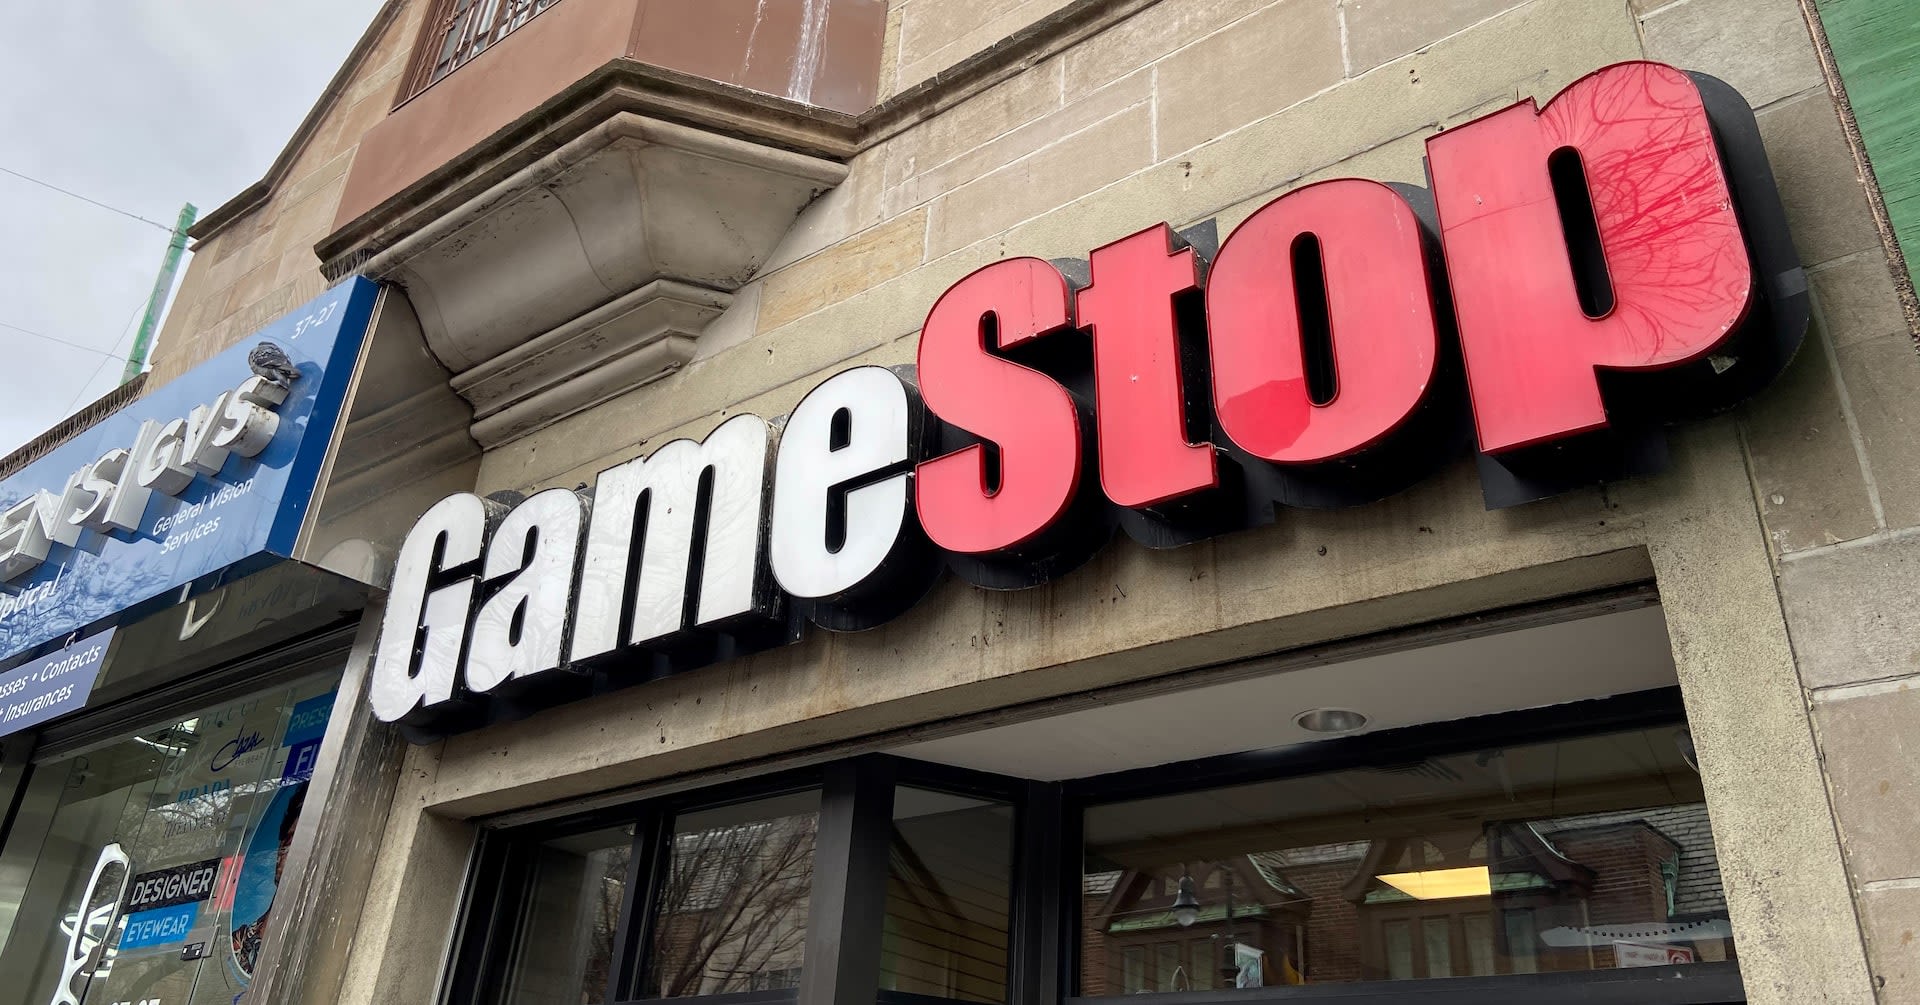 Meme stock GameStop jumps after raising $933 million in share sales